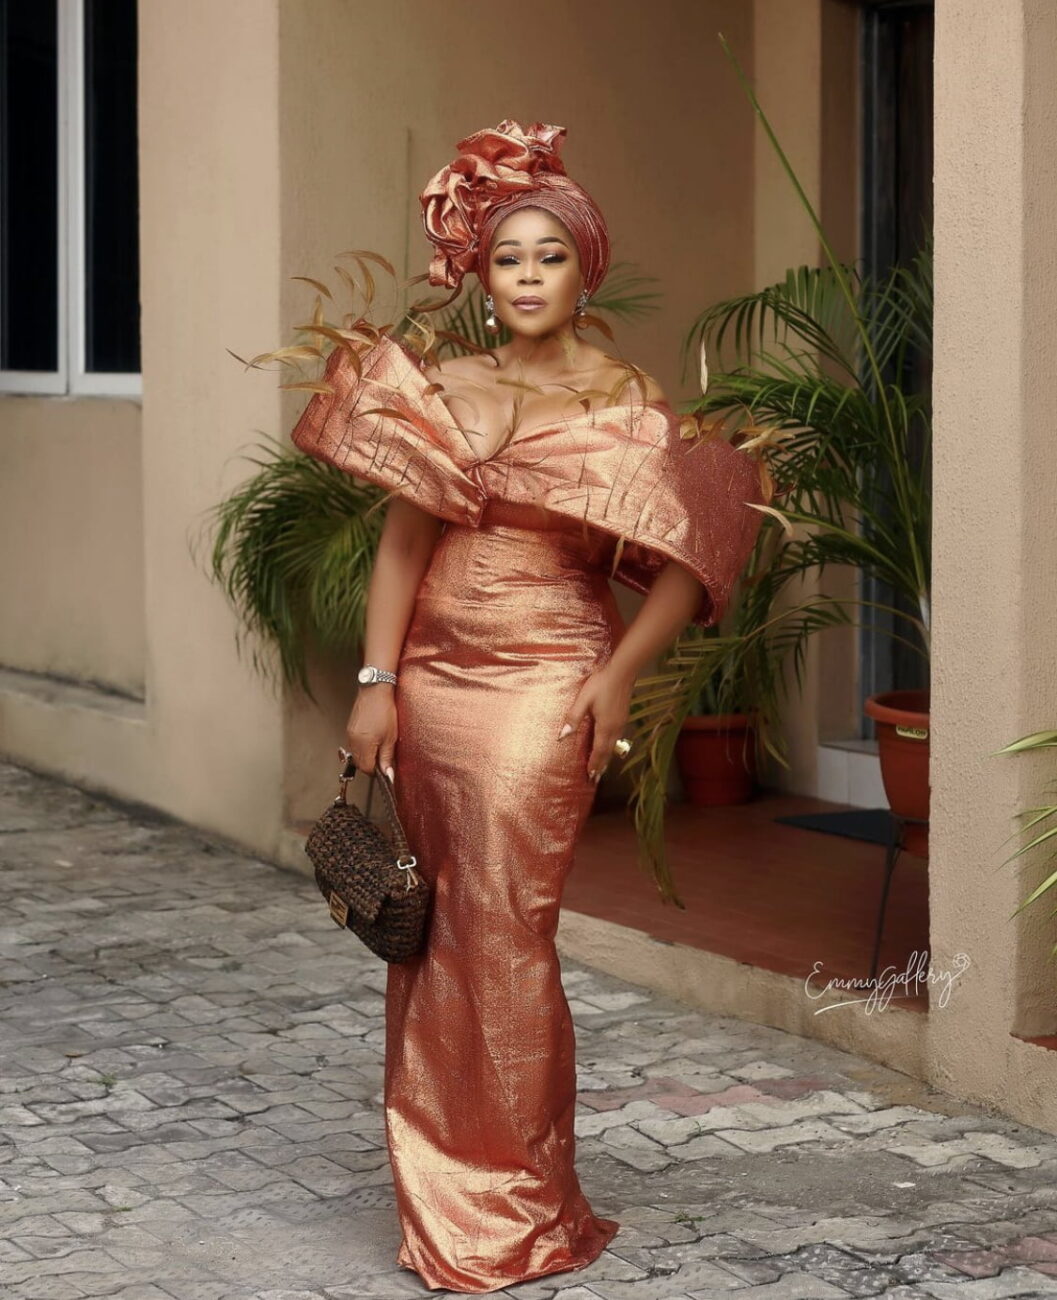 Shaffy Bello stuns in gorgeous outfit with feather designs.